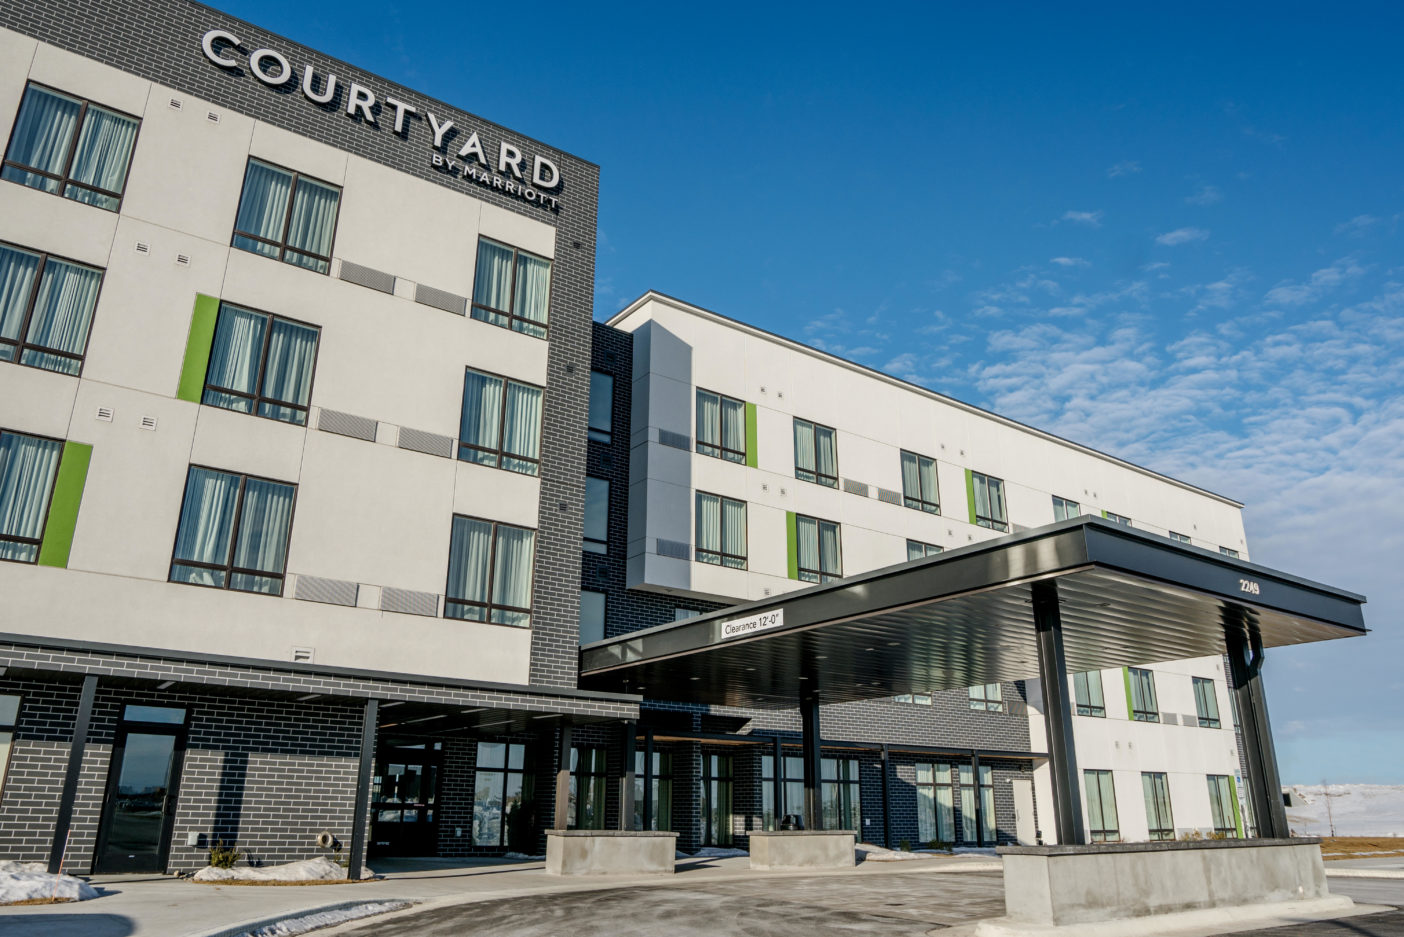 Courtyard by Marriott Fargo is a property implementing Broadvine.